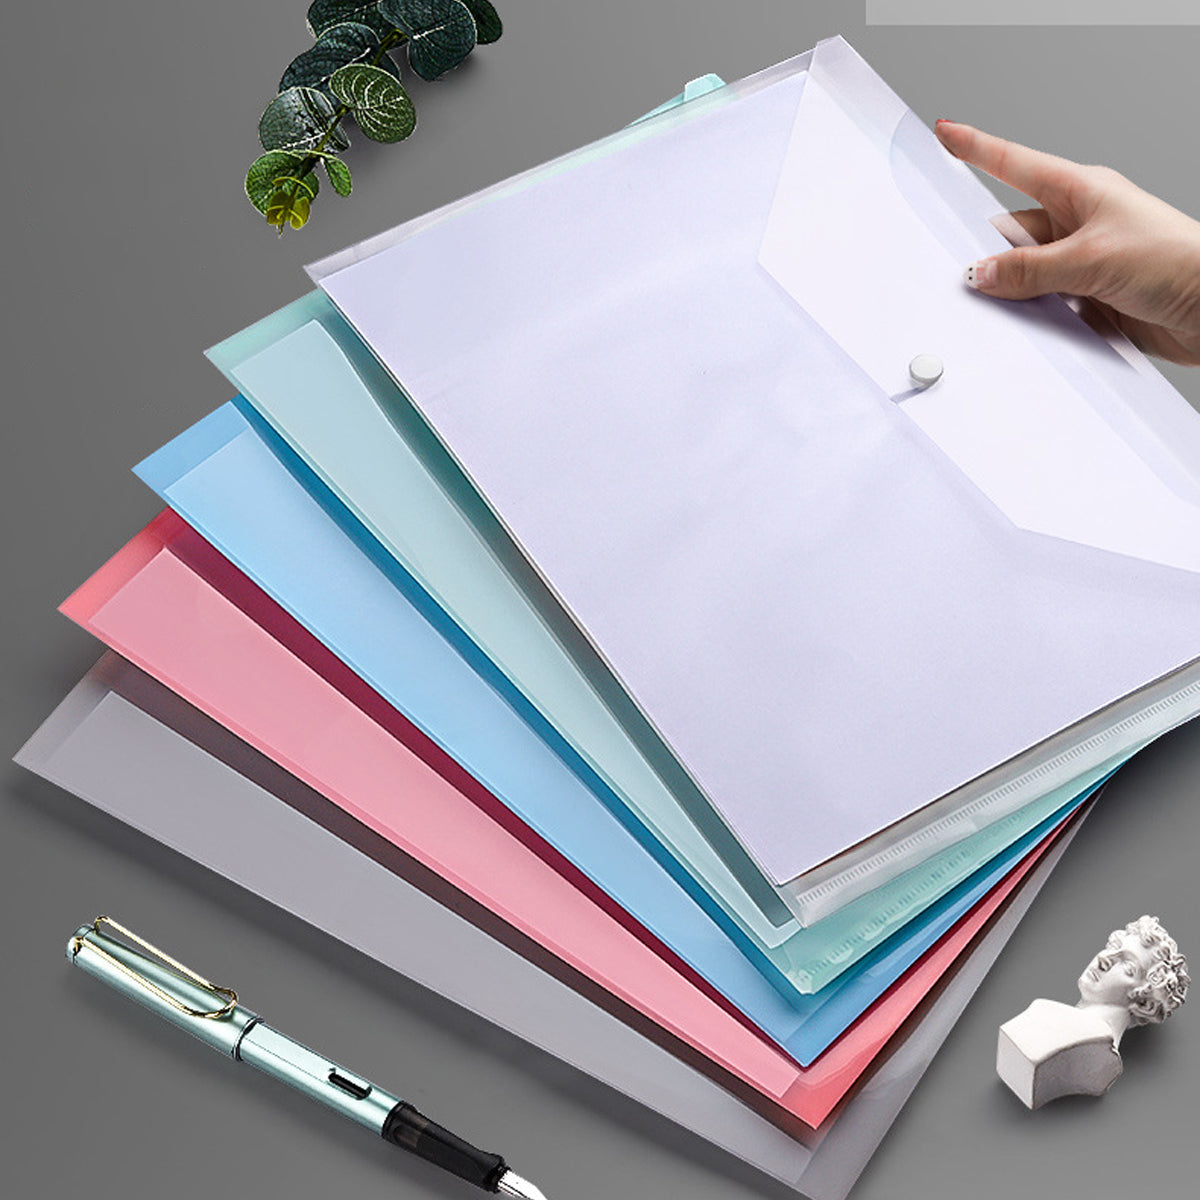 20pcs Plastic Envelopes,Poly Envelopes with Snap Button Closure,Clear Document Folders Letter A4 Size File Envelopes,Plastic File Folders for School Home Work Office Organization